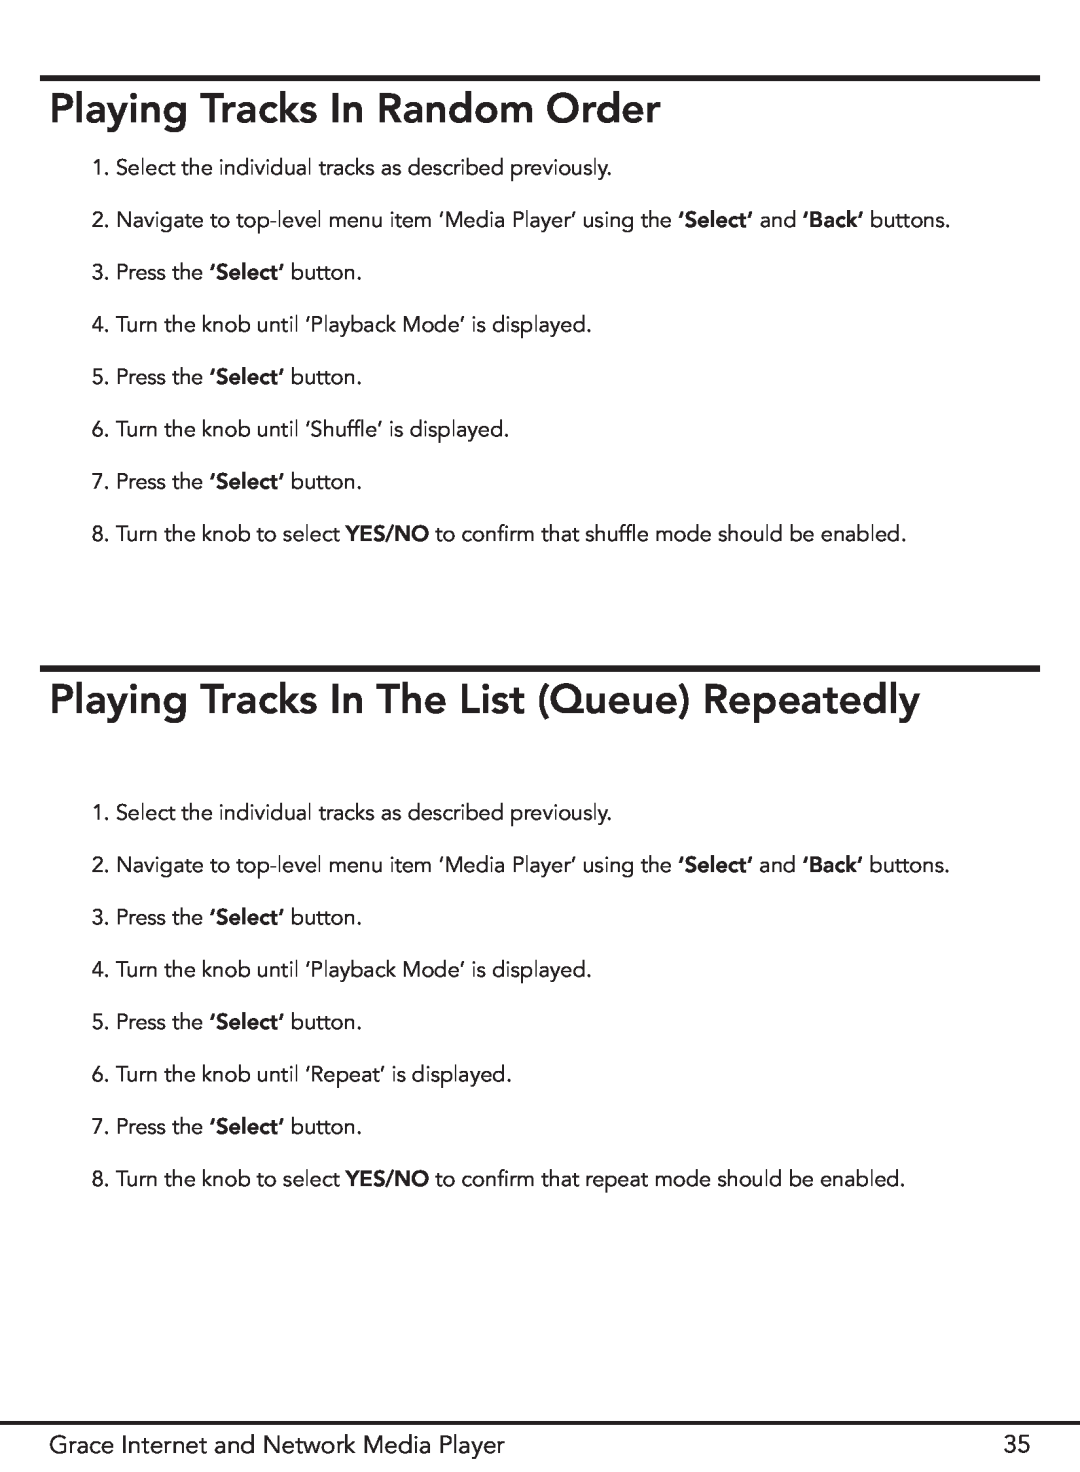 Grace GDI-IR3000 manual Playing Tracks In Random Order, Playing Tracks In The List Queue Repeatedly 